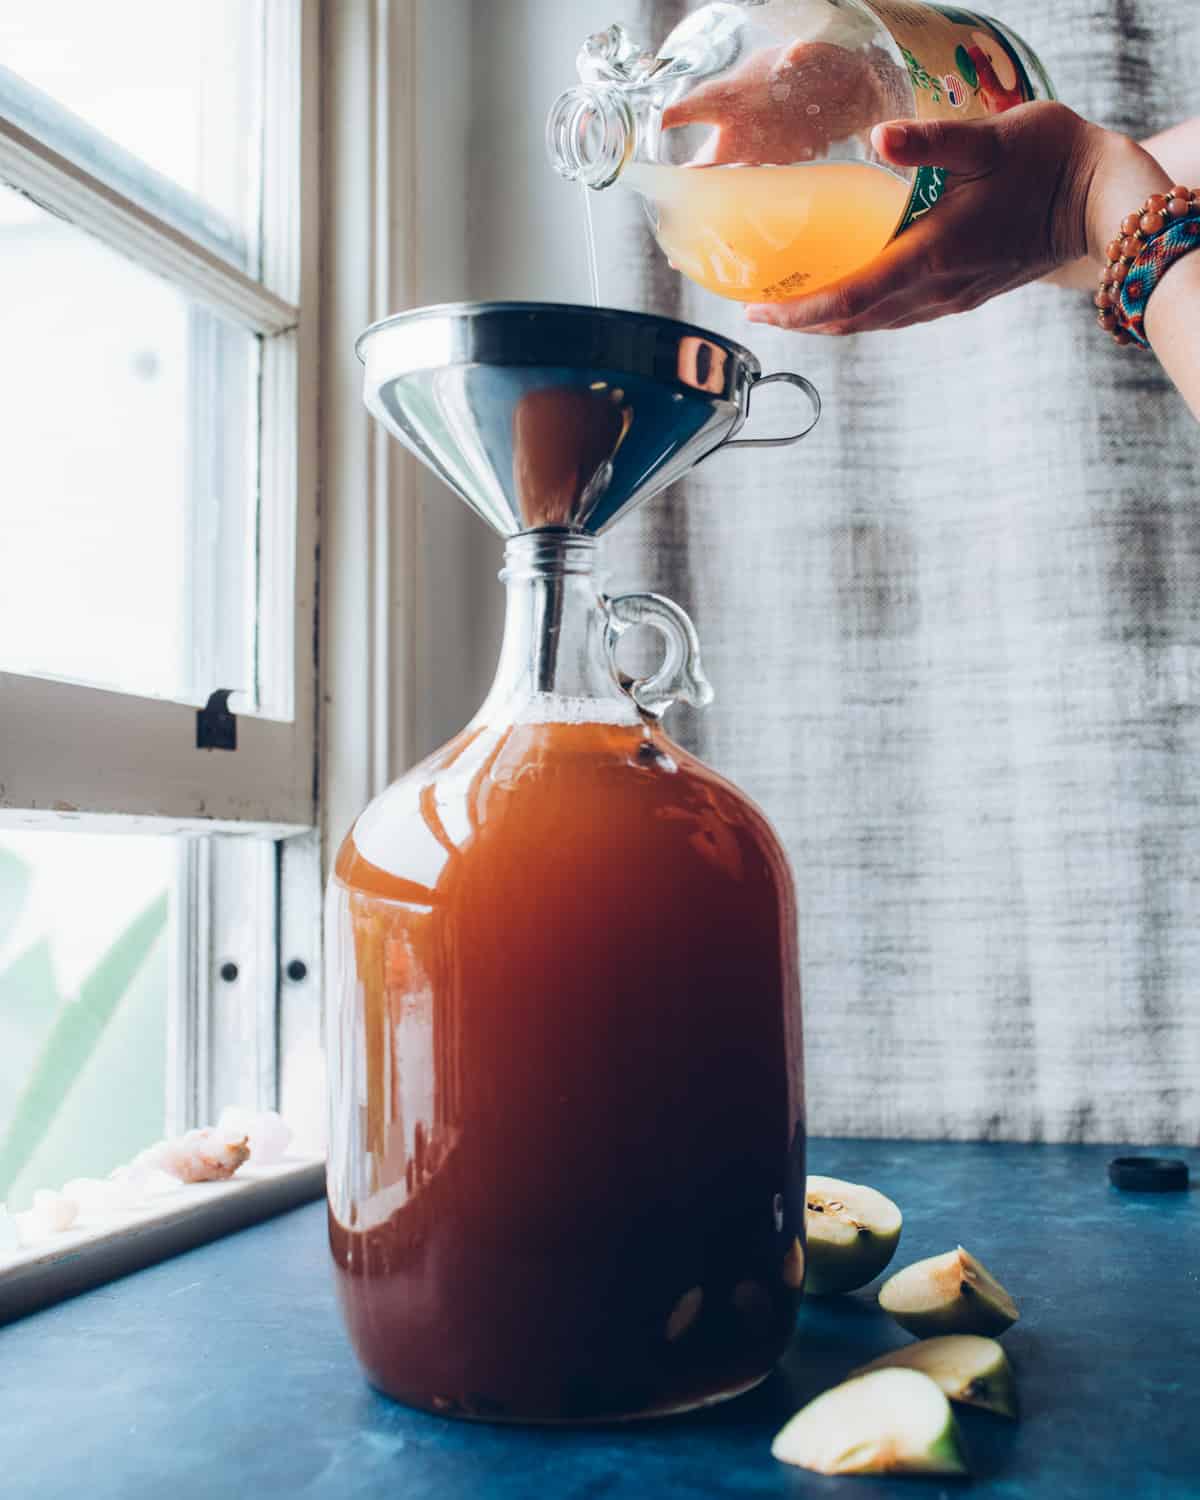 pouring the rest of the apple juice into the jug